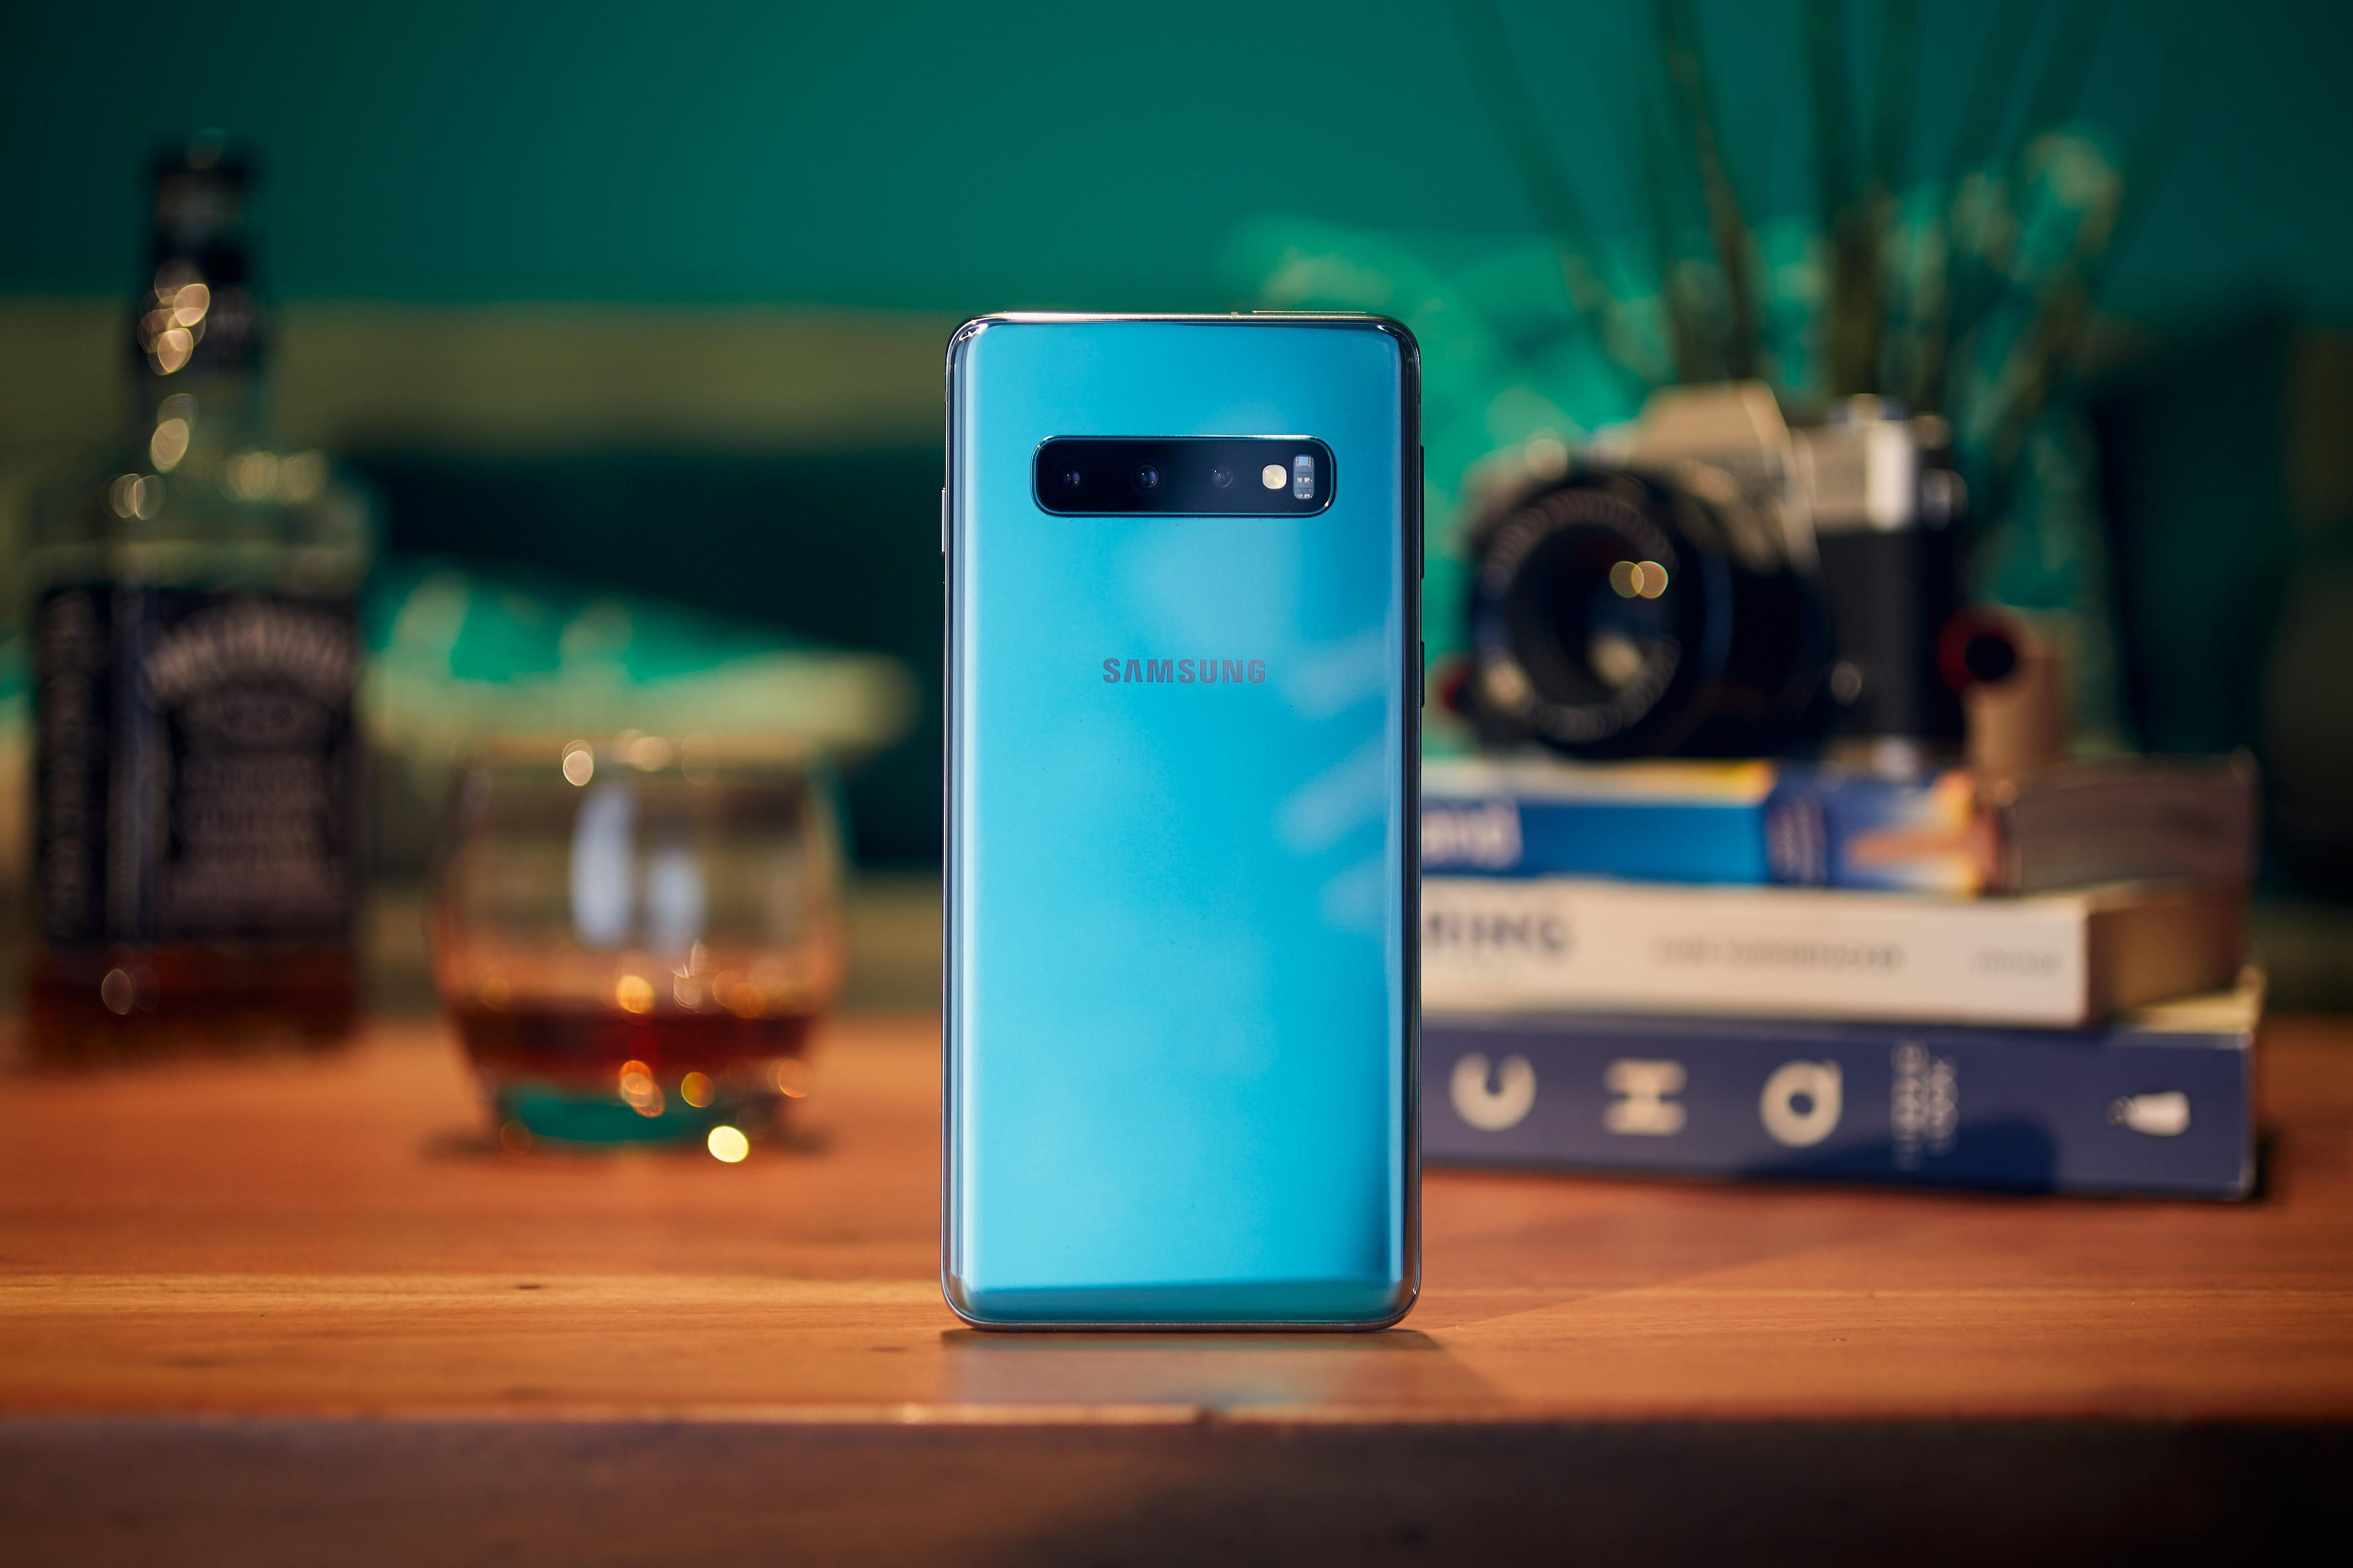 For those who want speed and performance - Samsung Galaxy S10 Plus